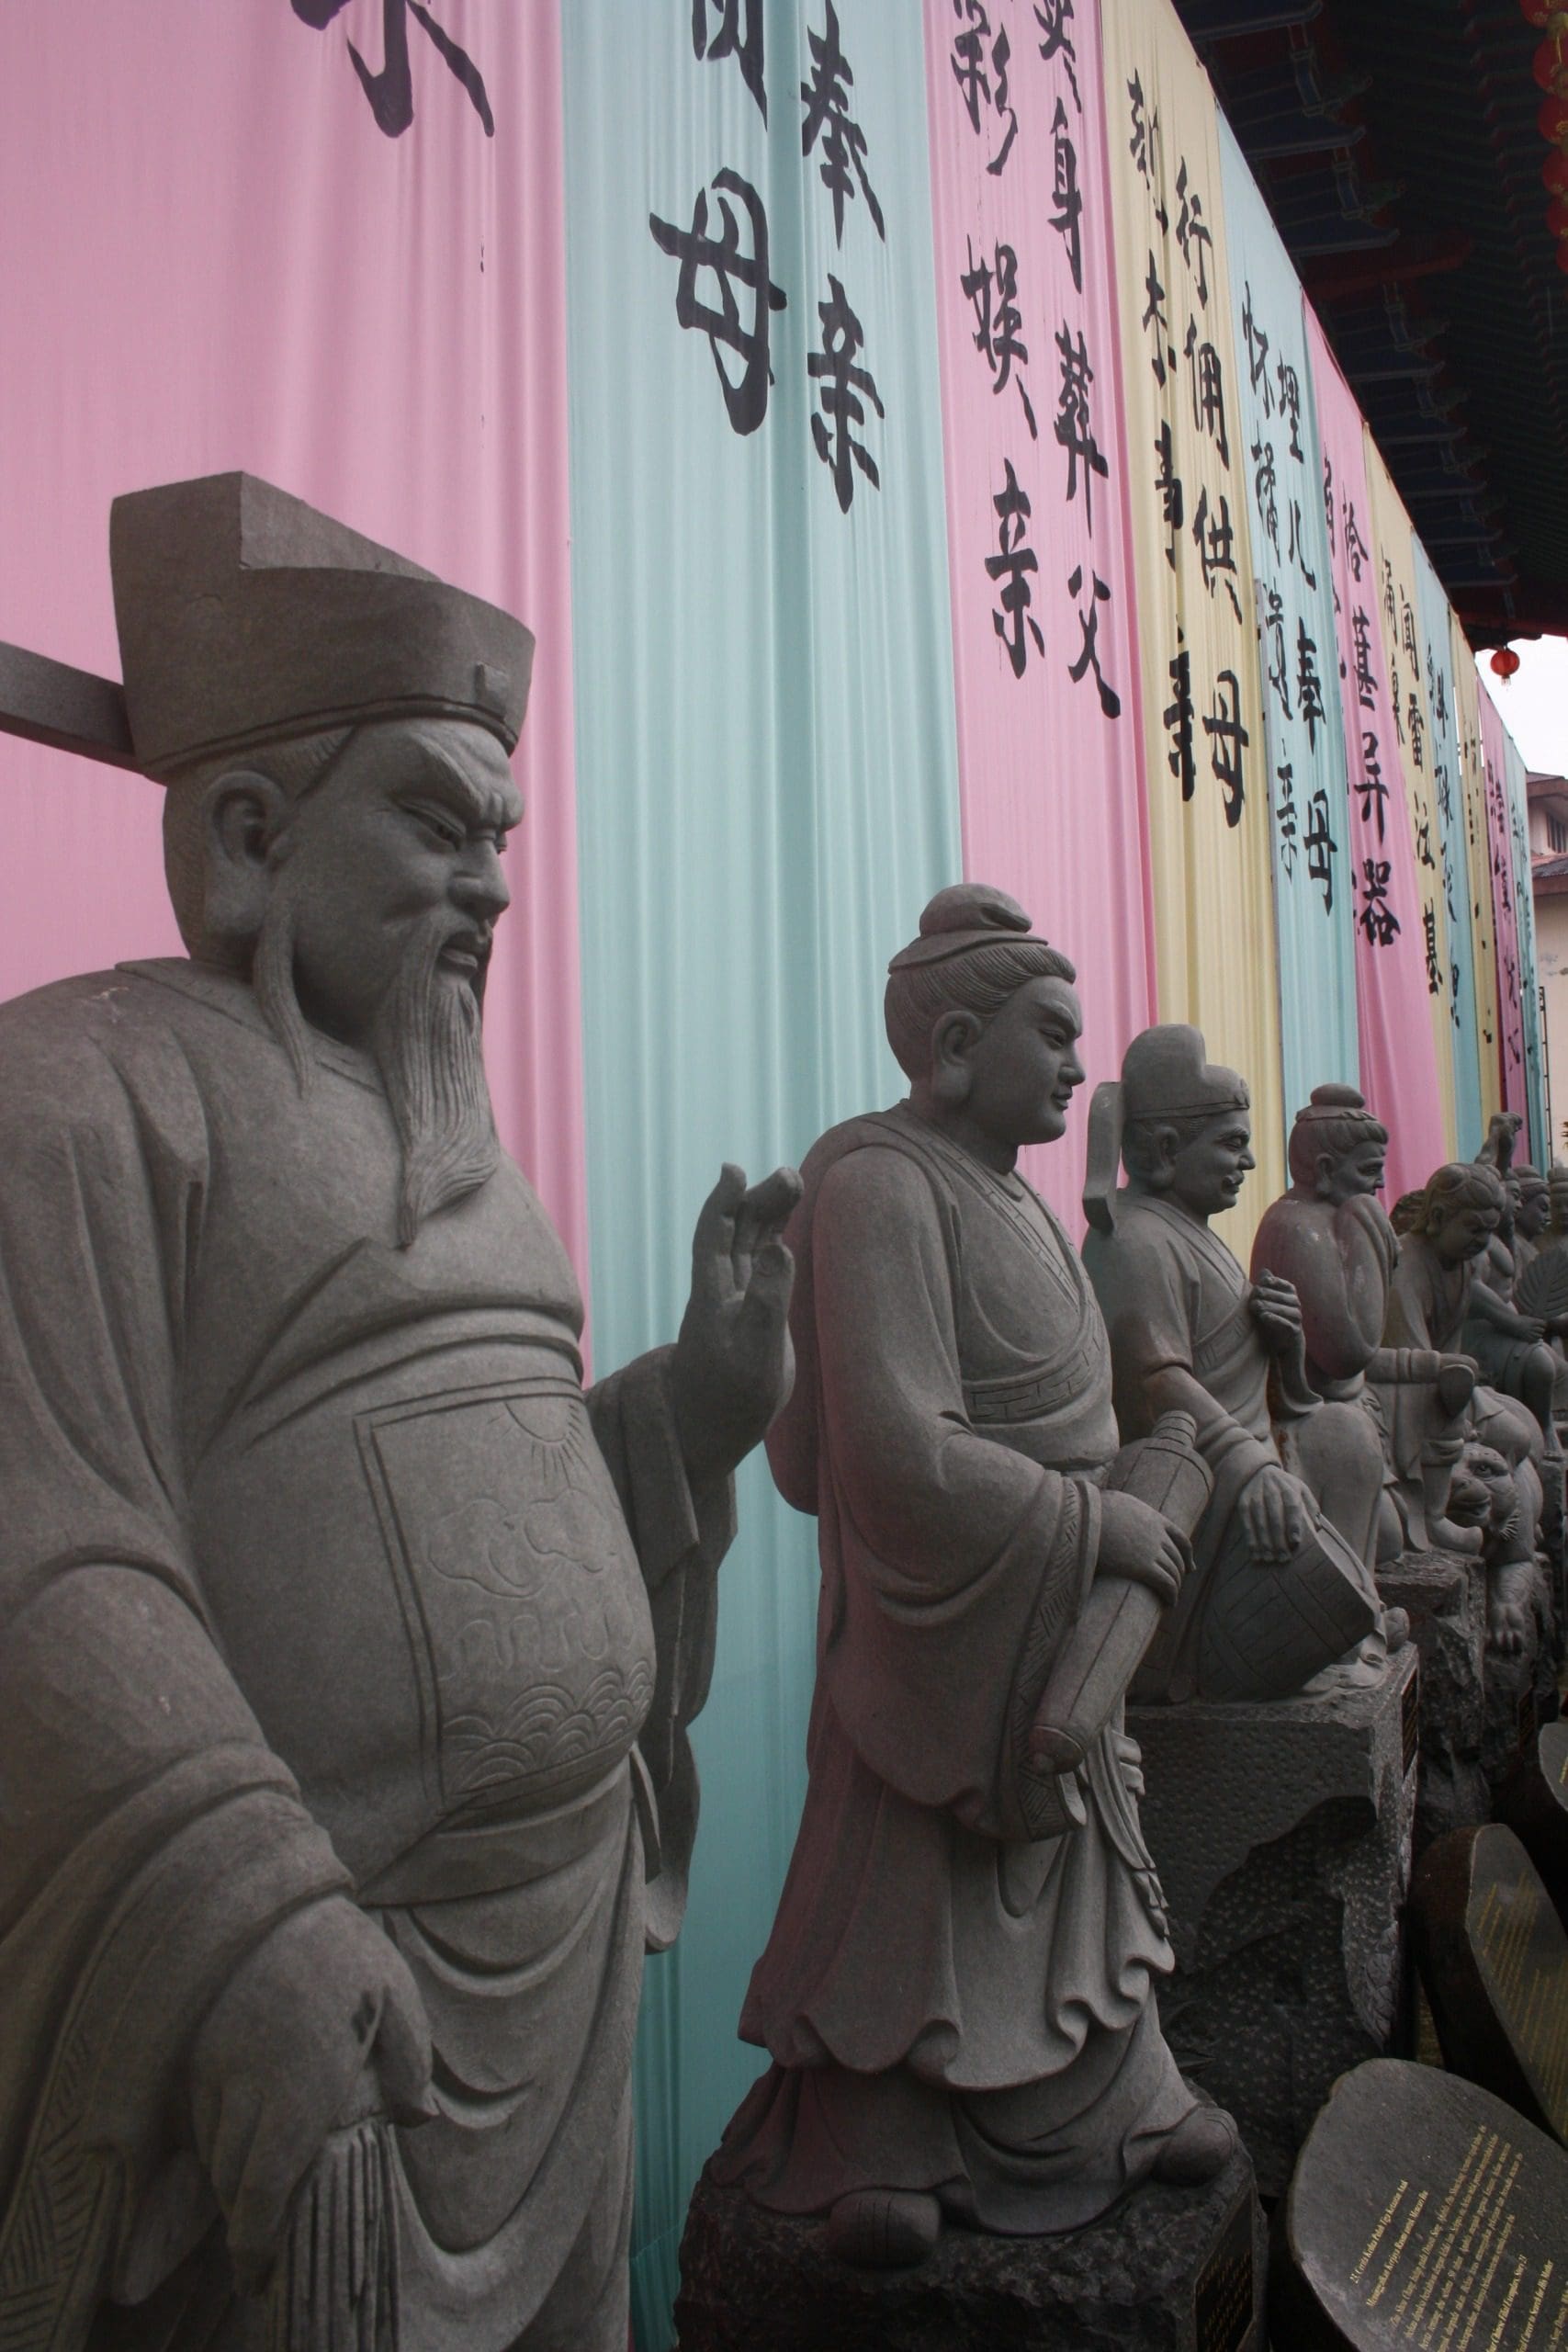 Statues at the temple